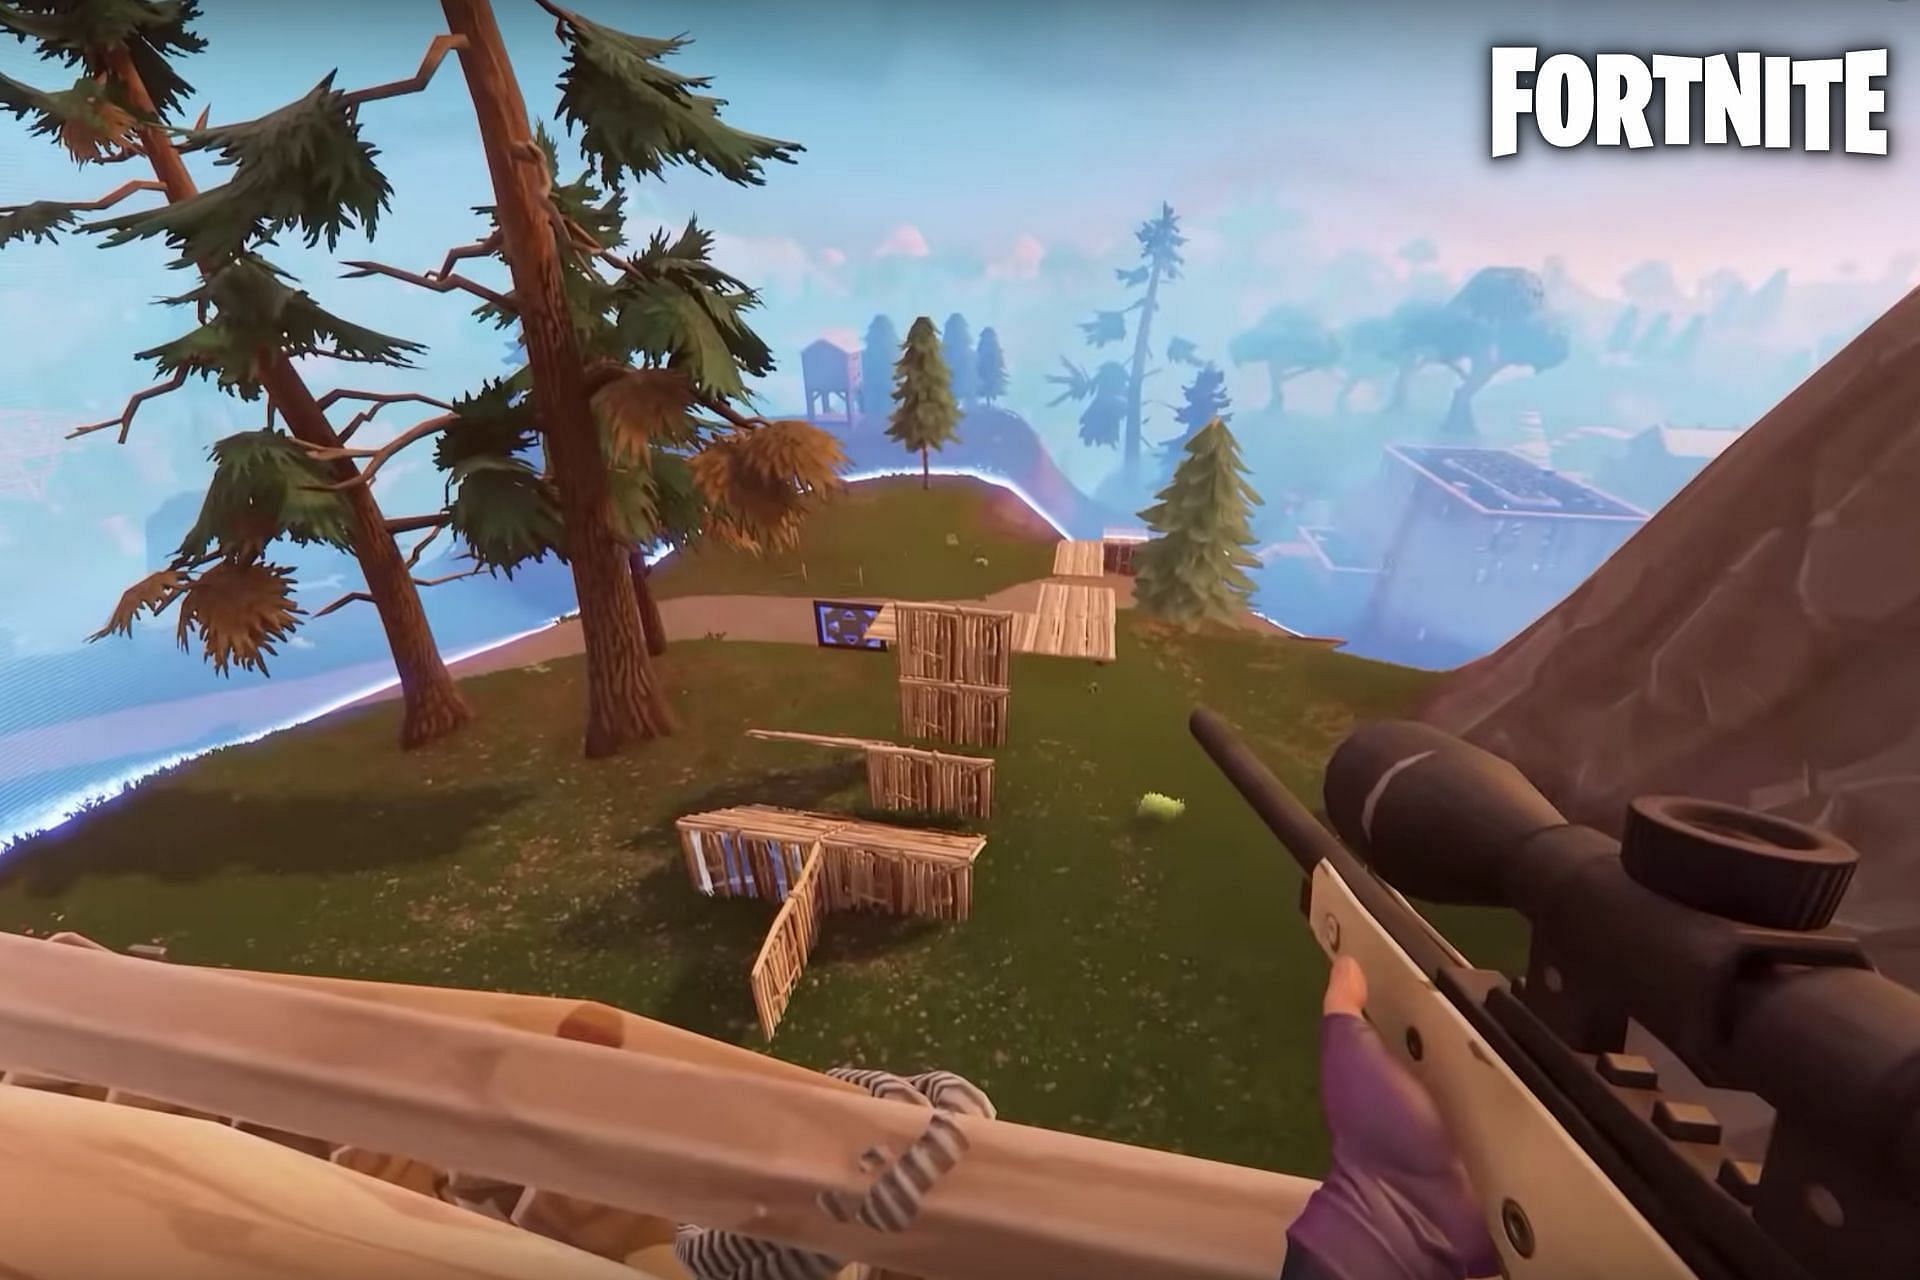 Fortnite first-person mode is currently in the works (Image via Sportskeeda)